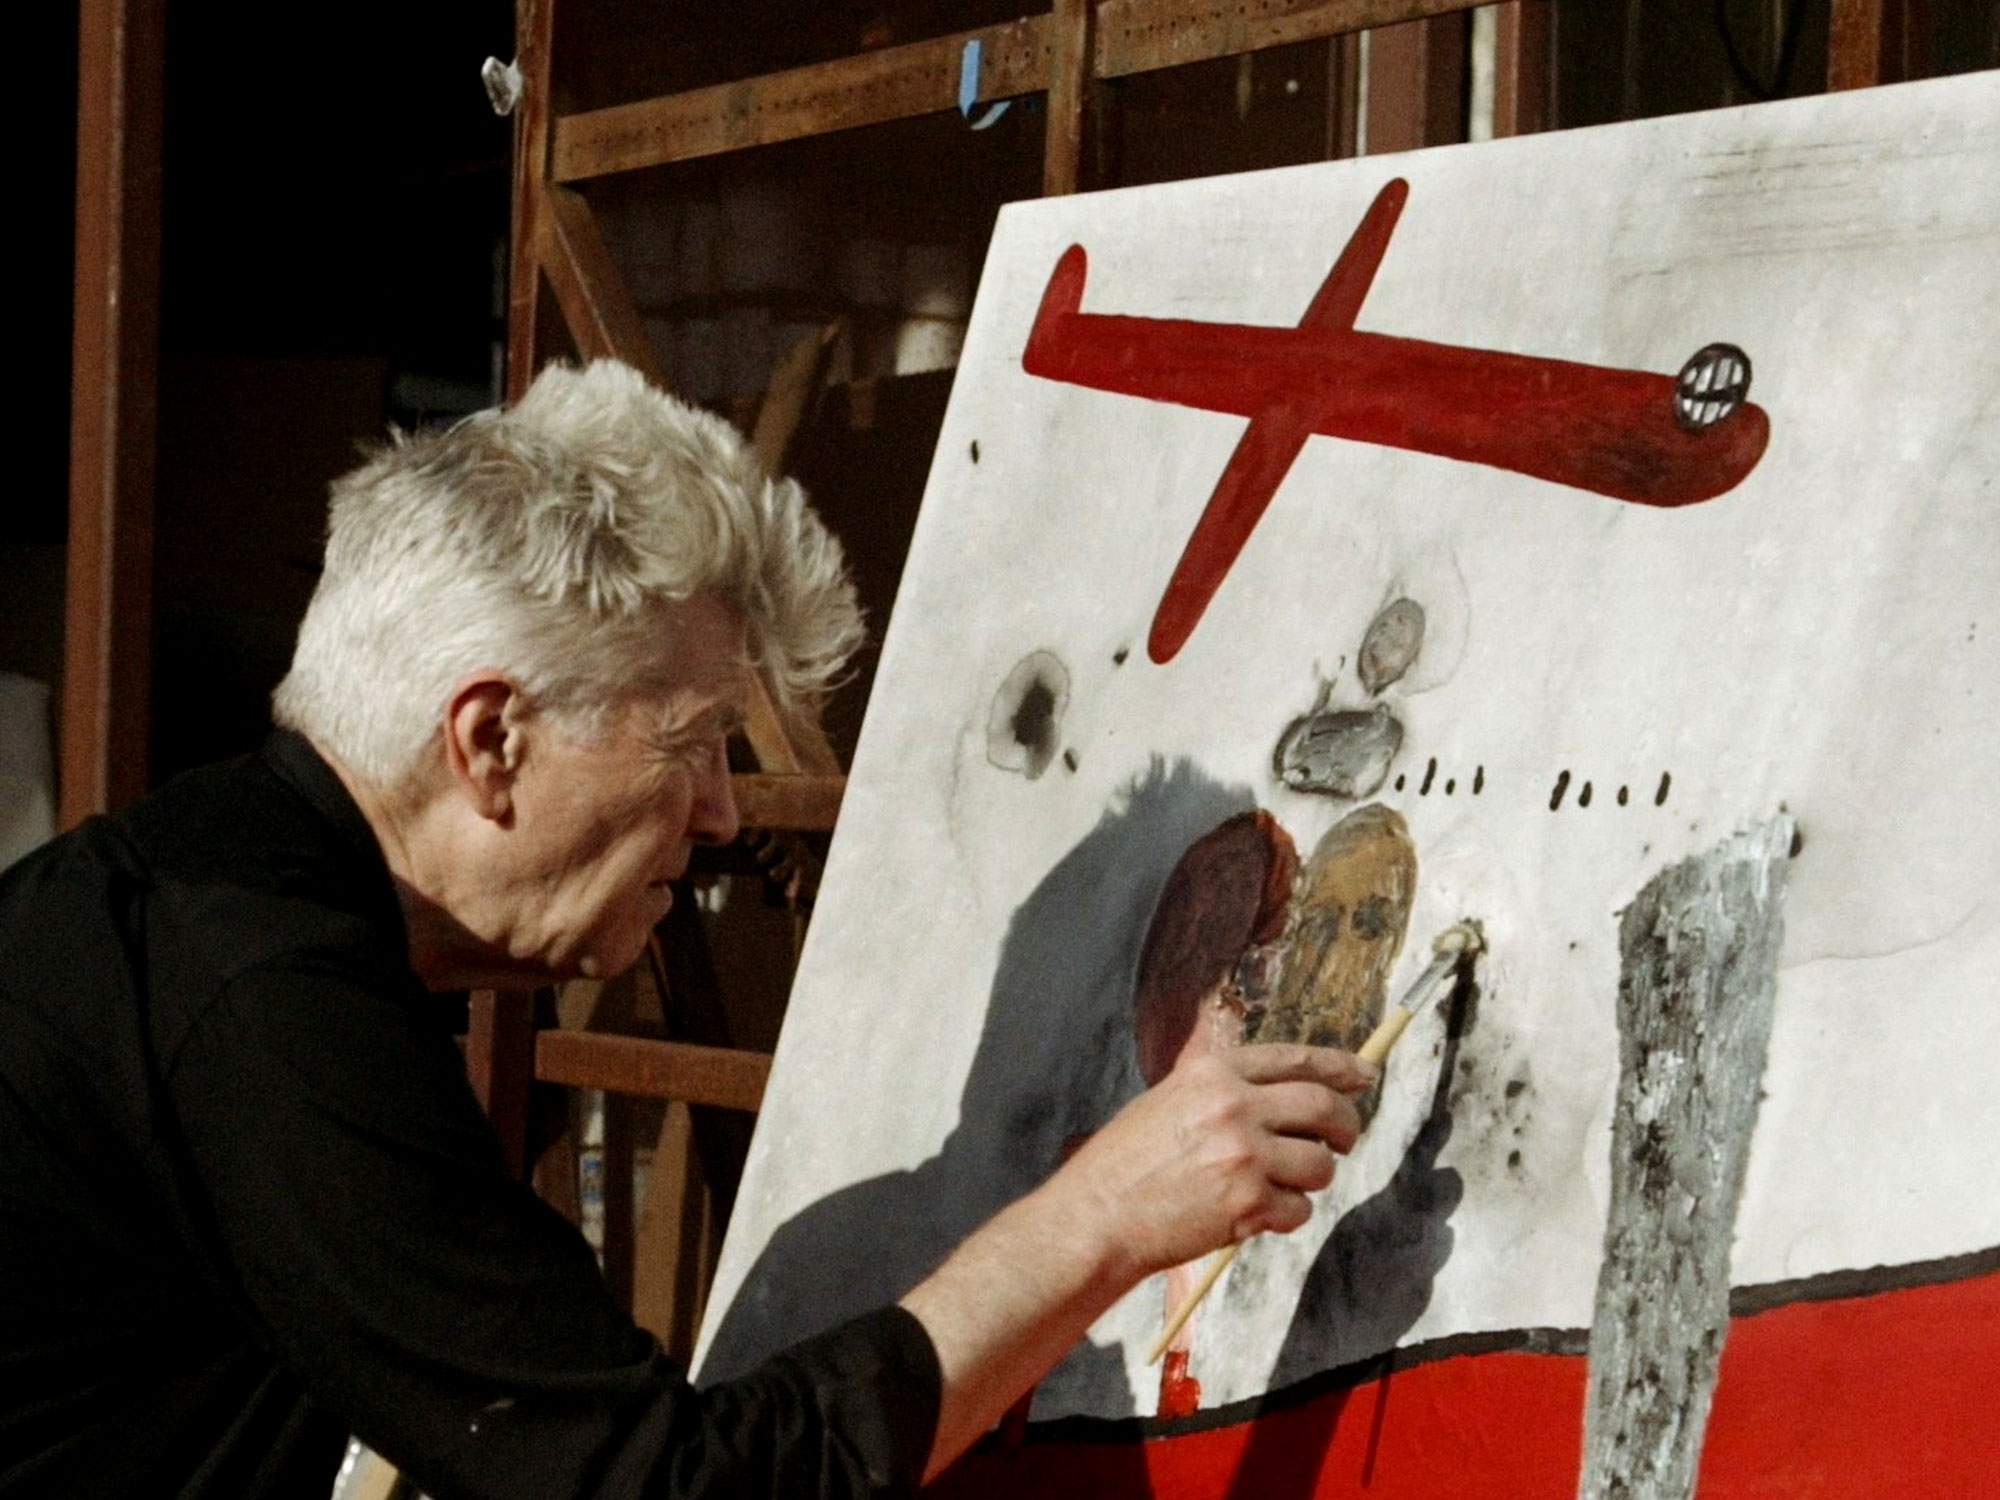 Win a limited edition signed print by David Lynch